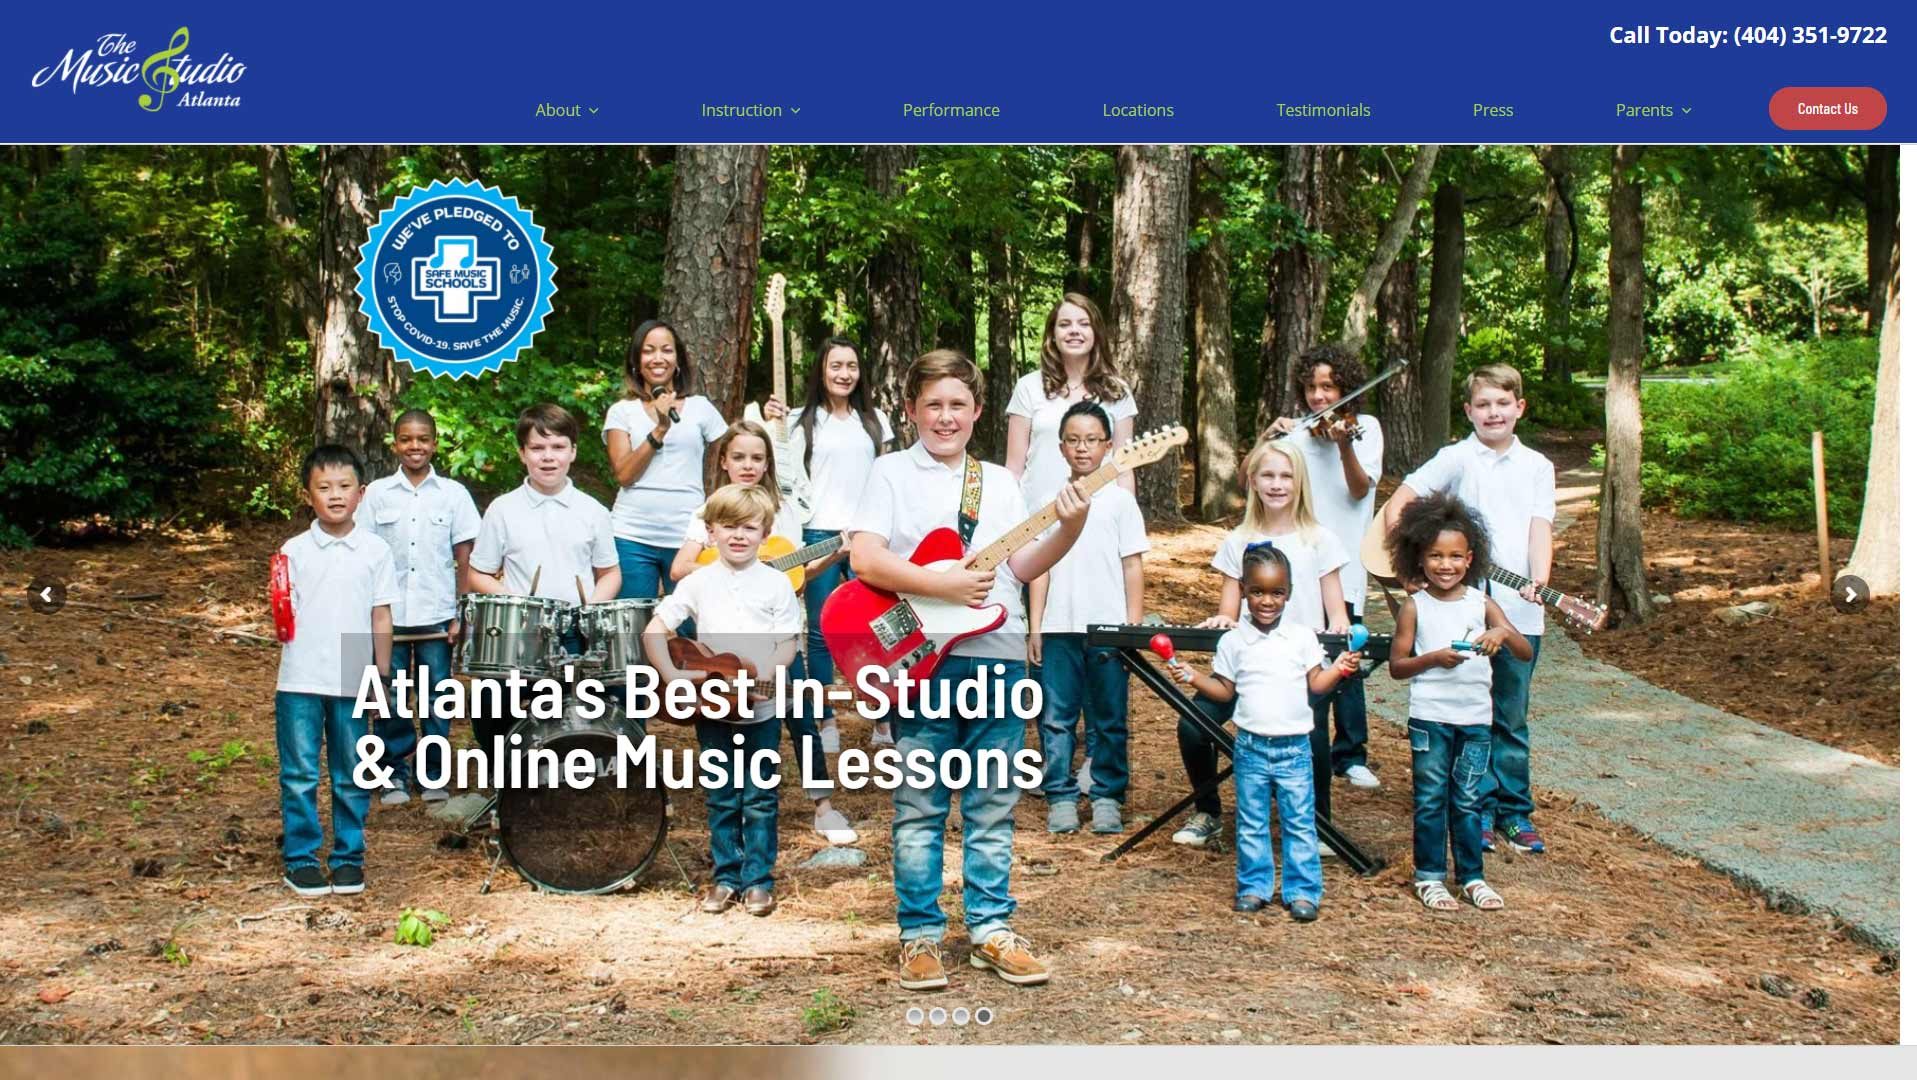 Best Small Business Website for The Music Studio of Atlanta